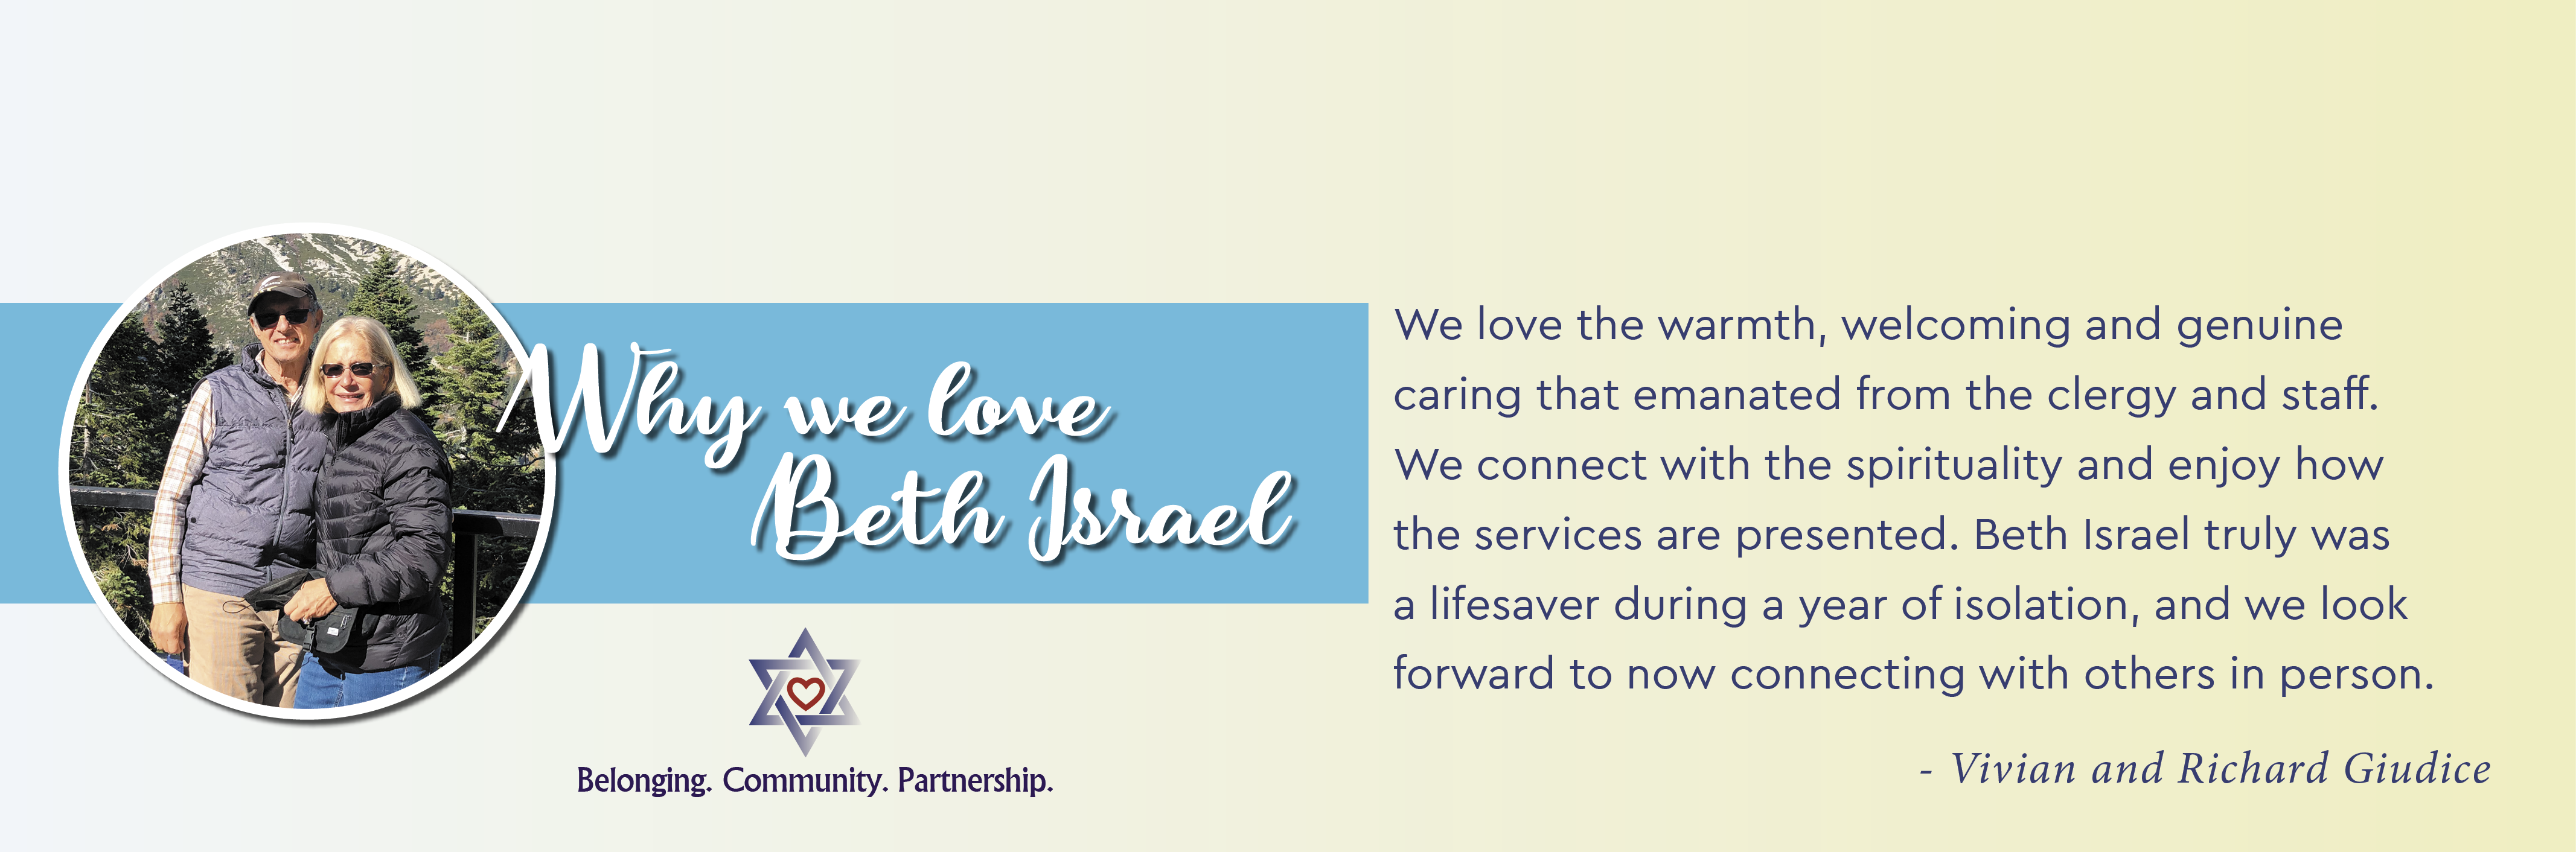 Why we love Beth Israel - We love the warmth, welcoming and genuine caring that emanated from the clergy and staff. We connect with the spirituality and enjoy how the services are presented. Beth Israel truly was a lifesaver during a year of isolation, and we look forward to now connecting with others in person. - Vivian & Richard Guidice